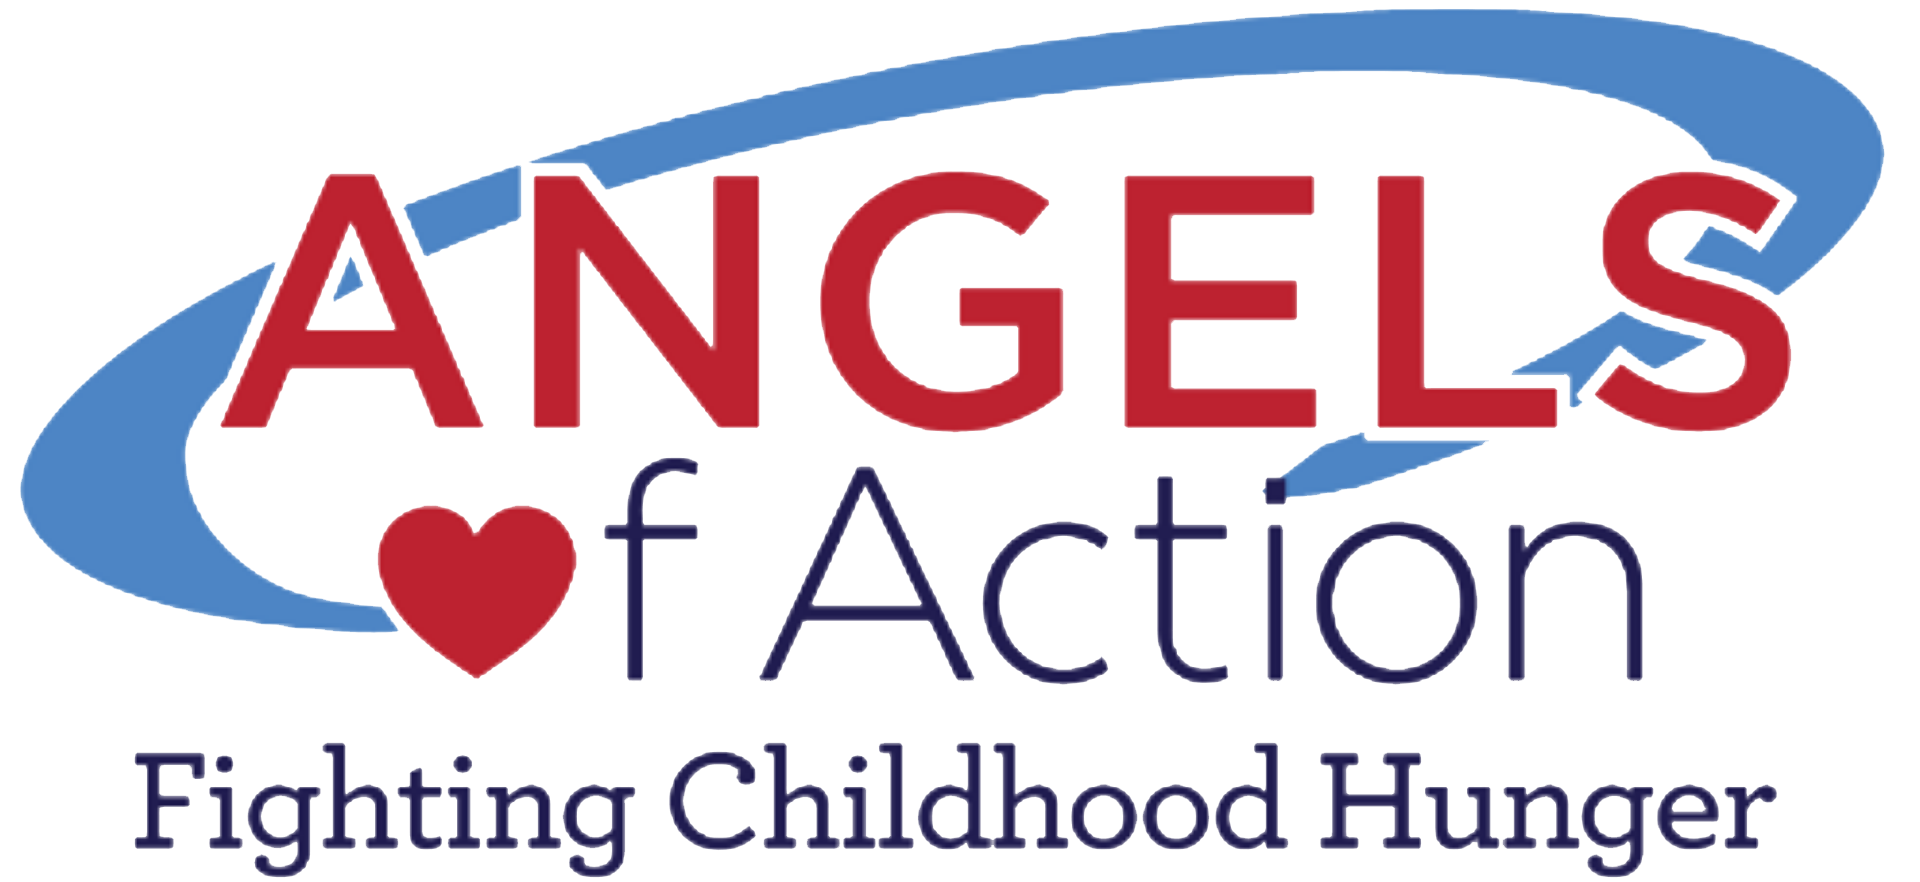 Angels of Action